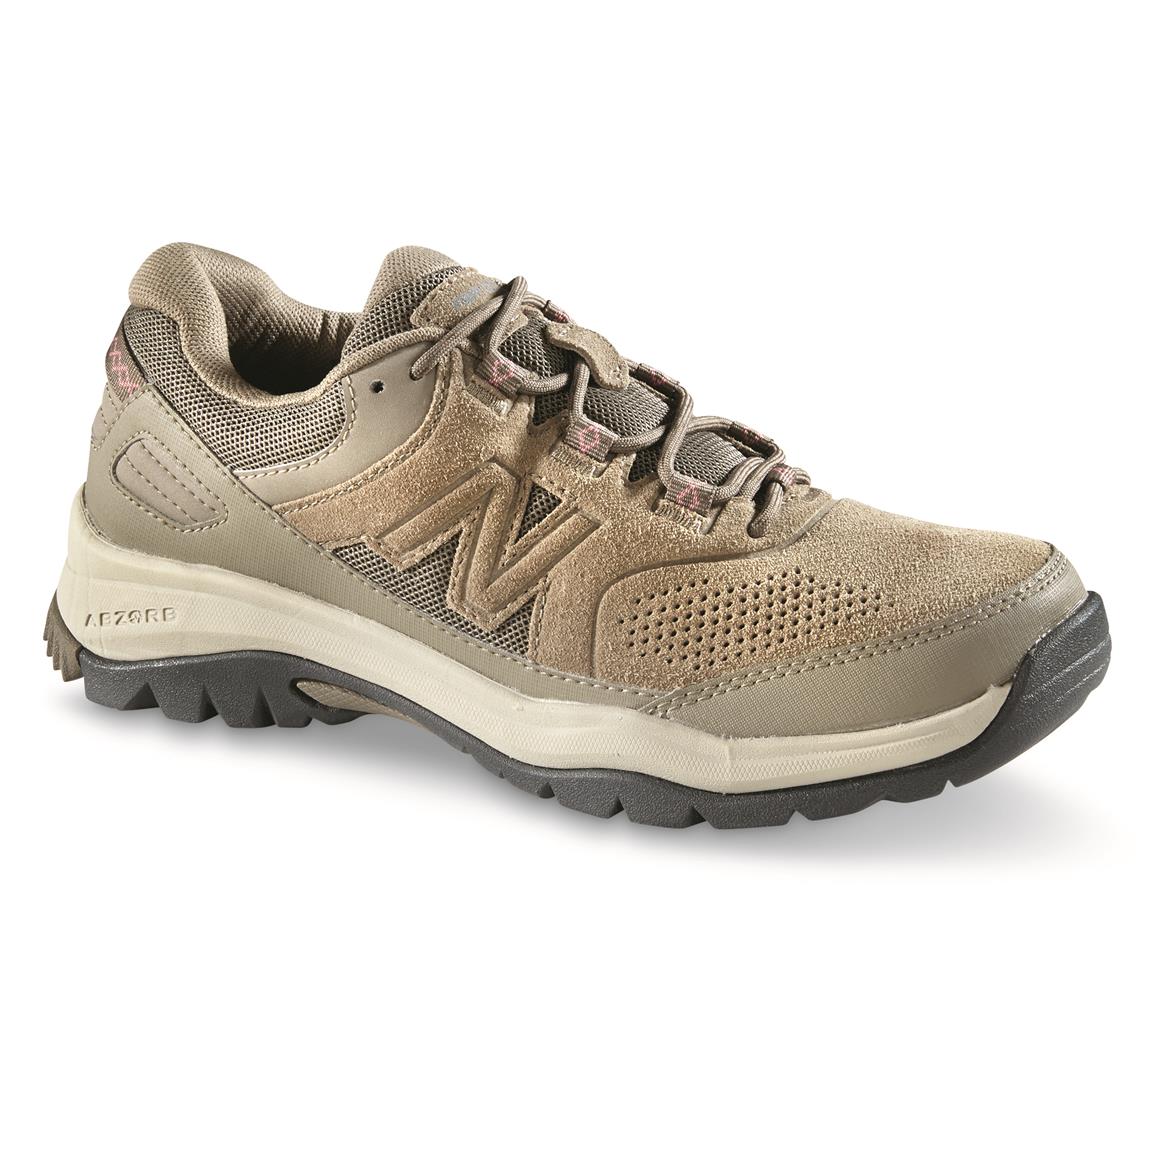 New Balance Women's 769 Country Walker Shoes - 675985, Running Shoes ...